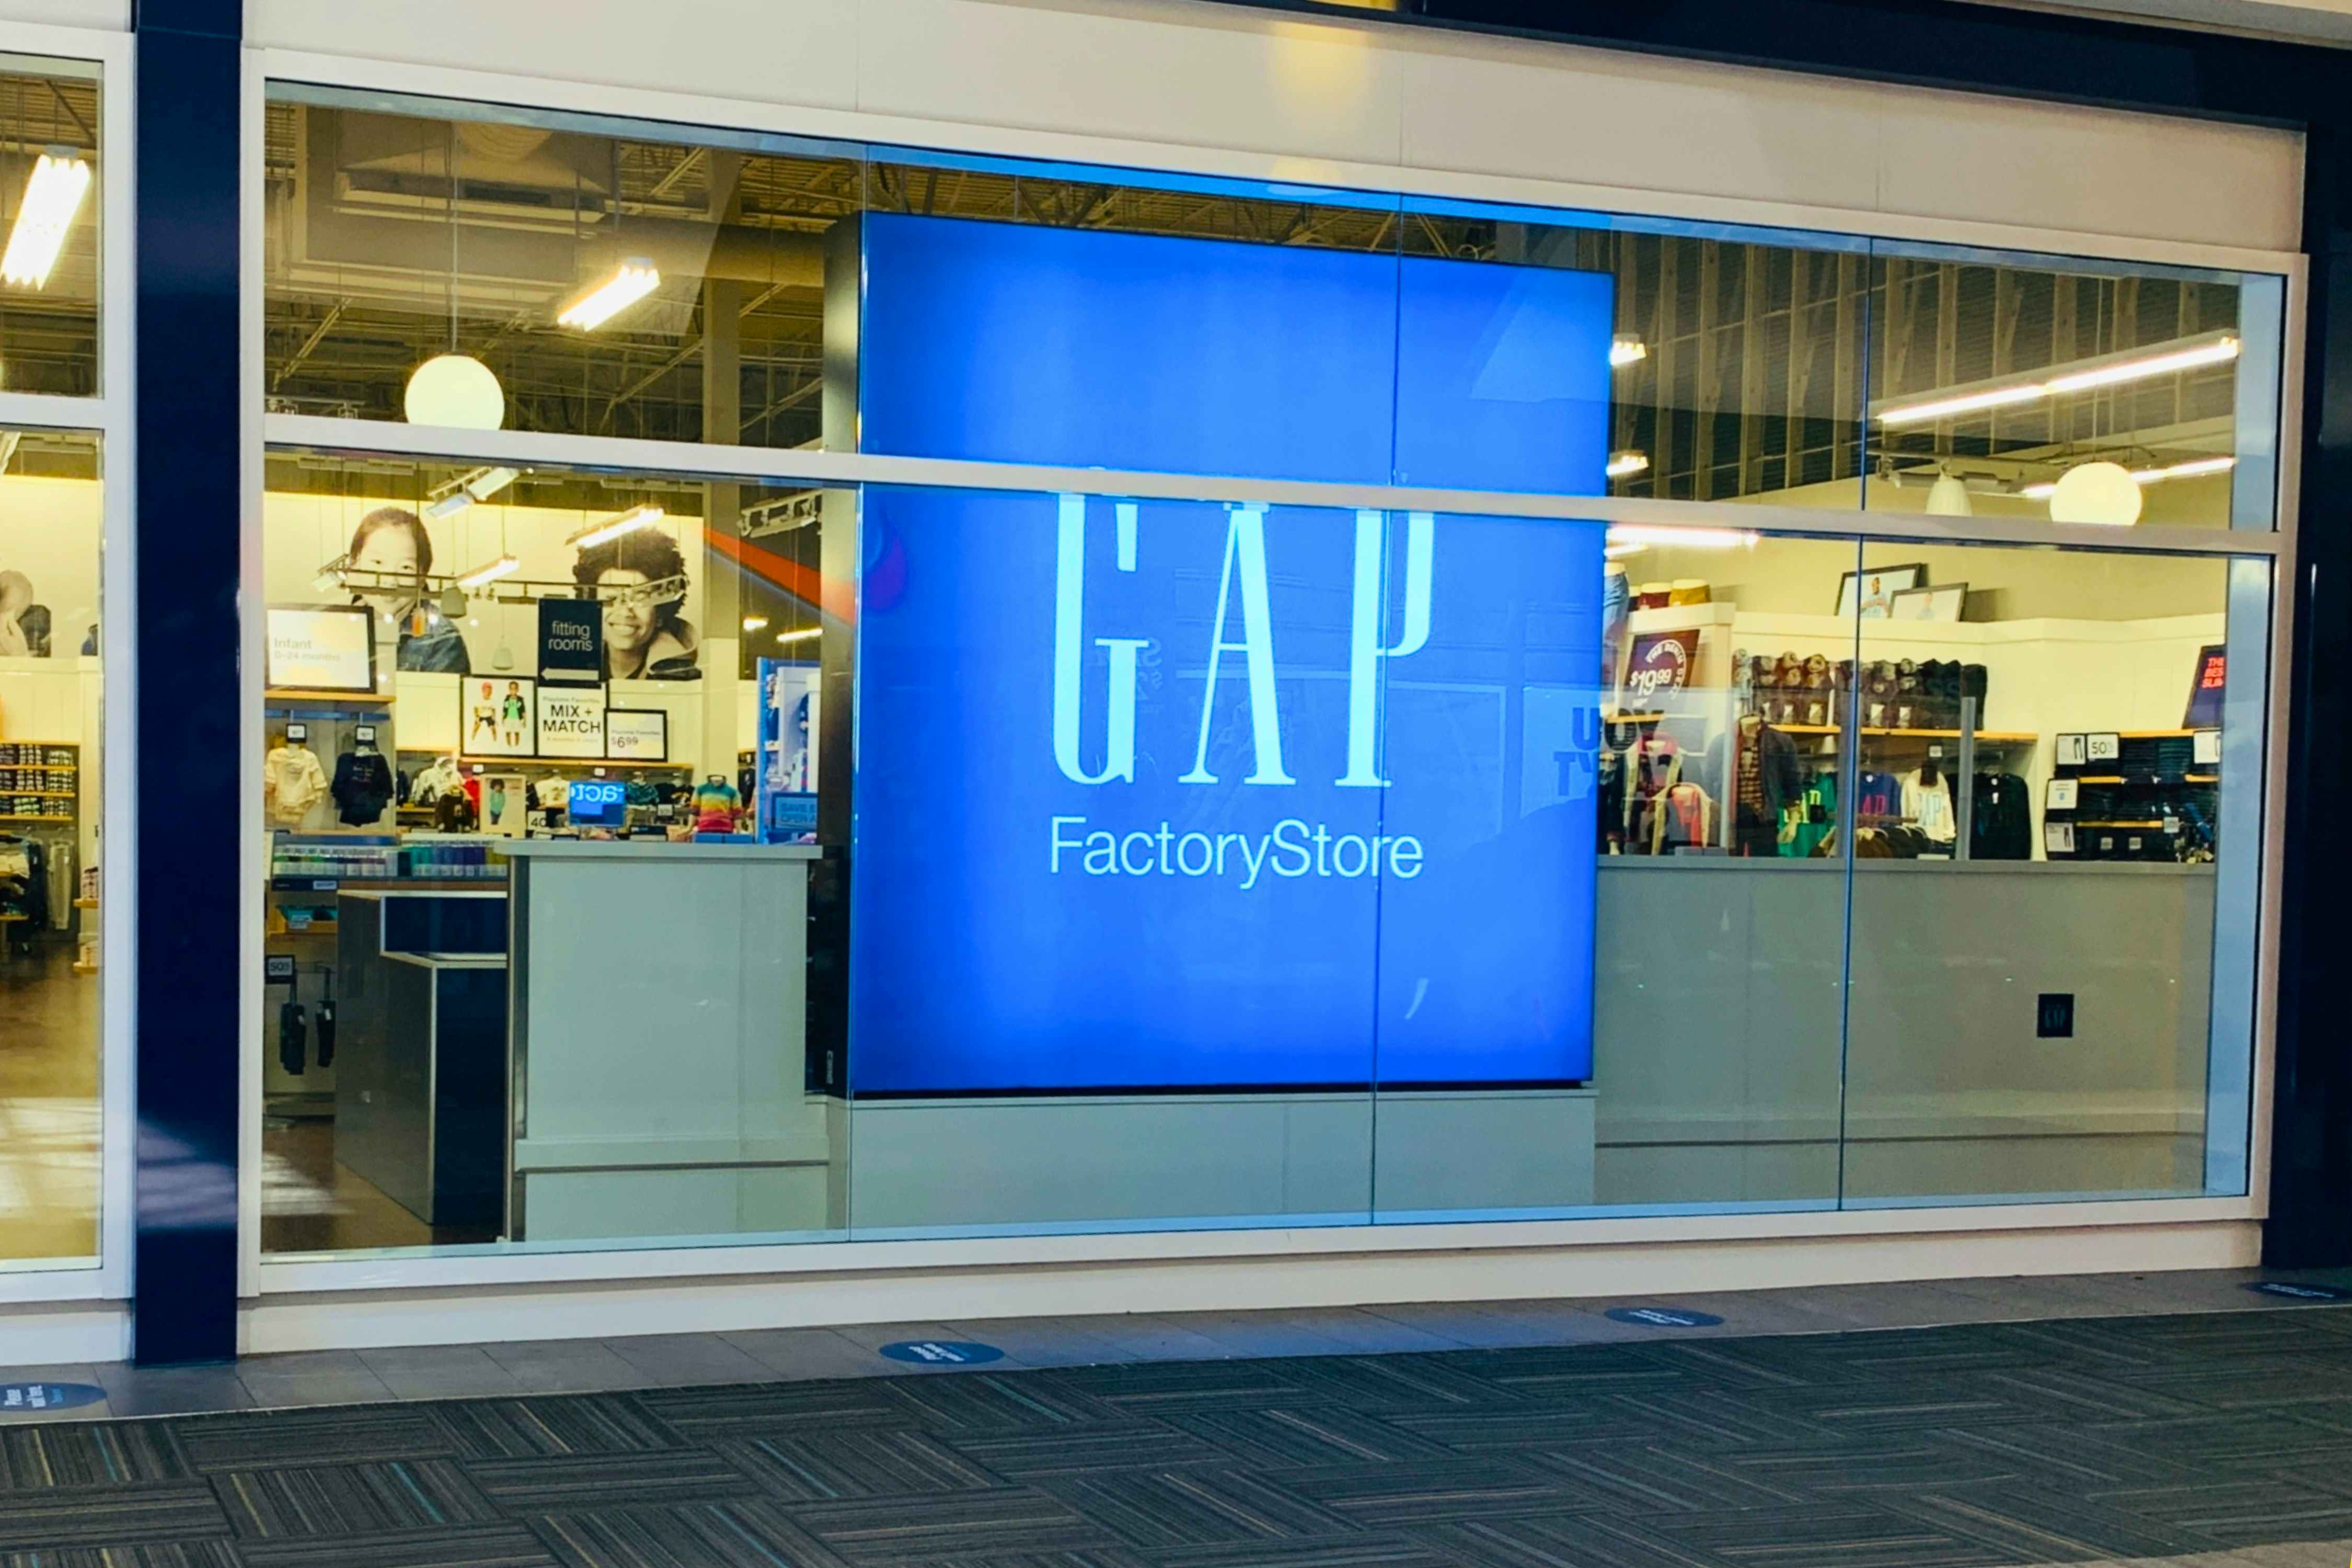 I Just Got $415 in Gap Factory Clothes for $82 Shipped (Double Coupons)